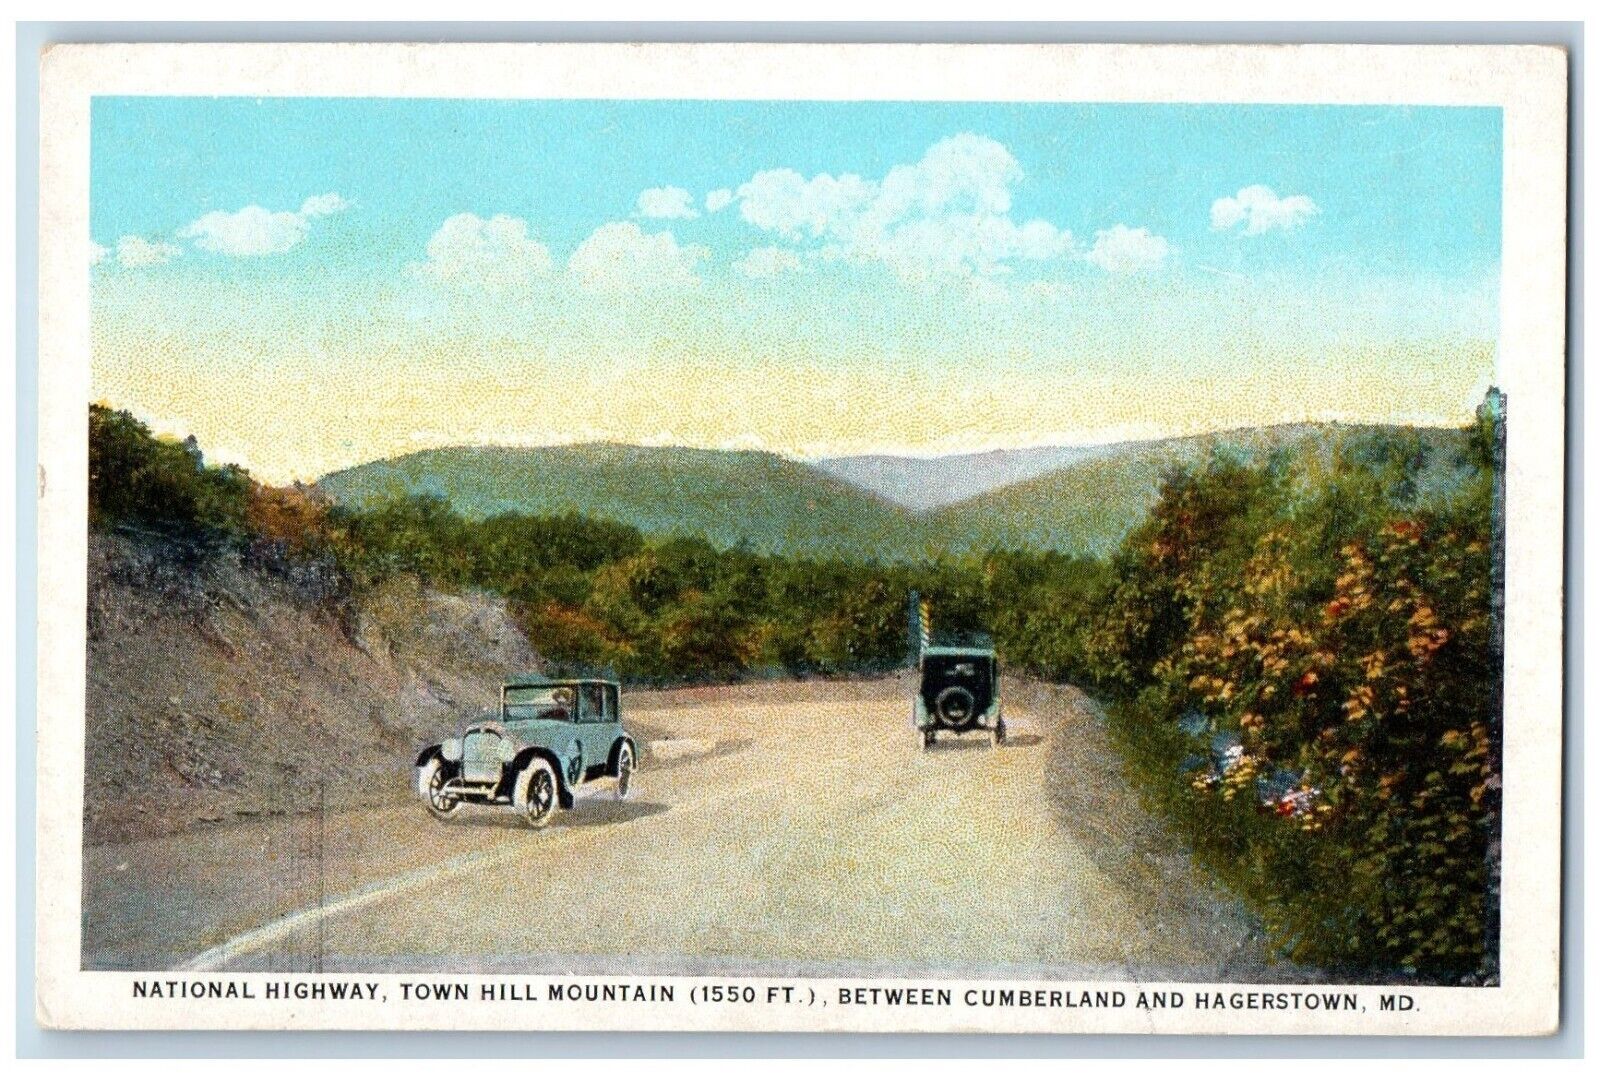 Hagerstown Maryland Postcard National Highway Town Hill Mountain Cumberland 1940